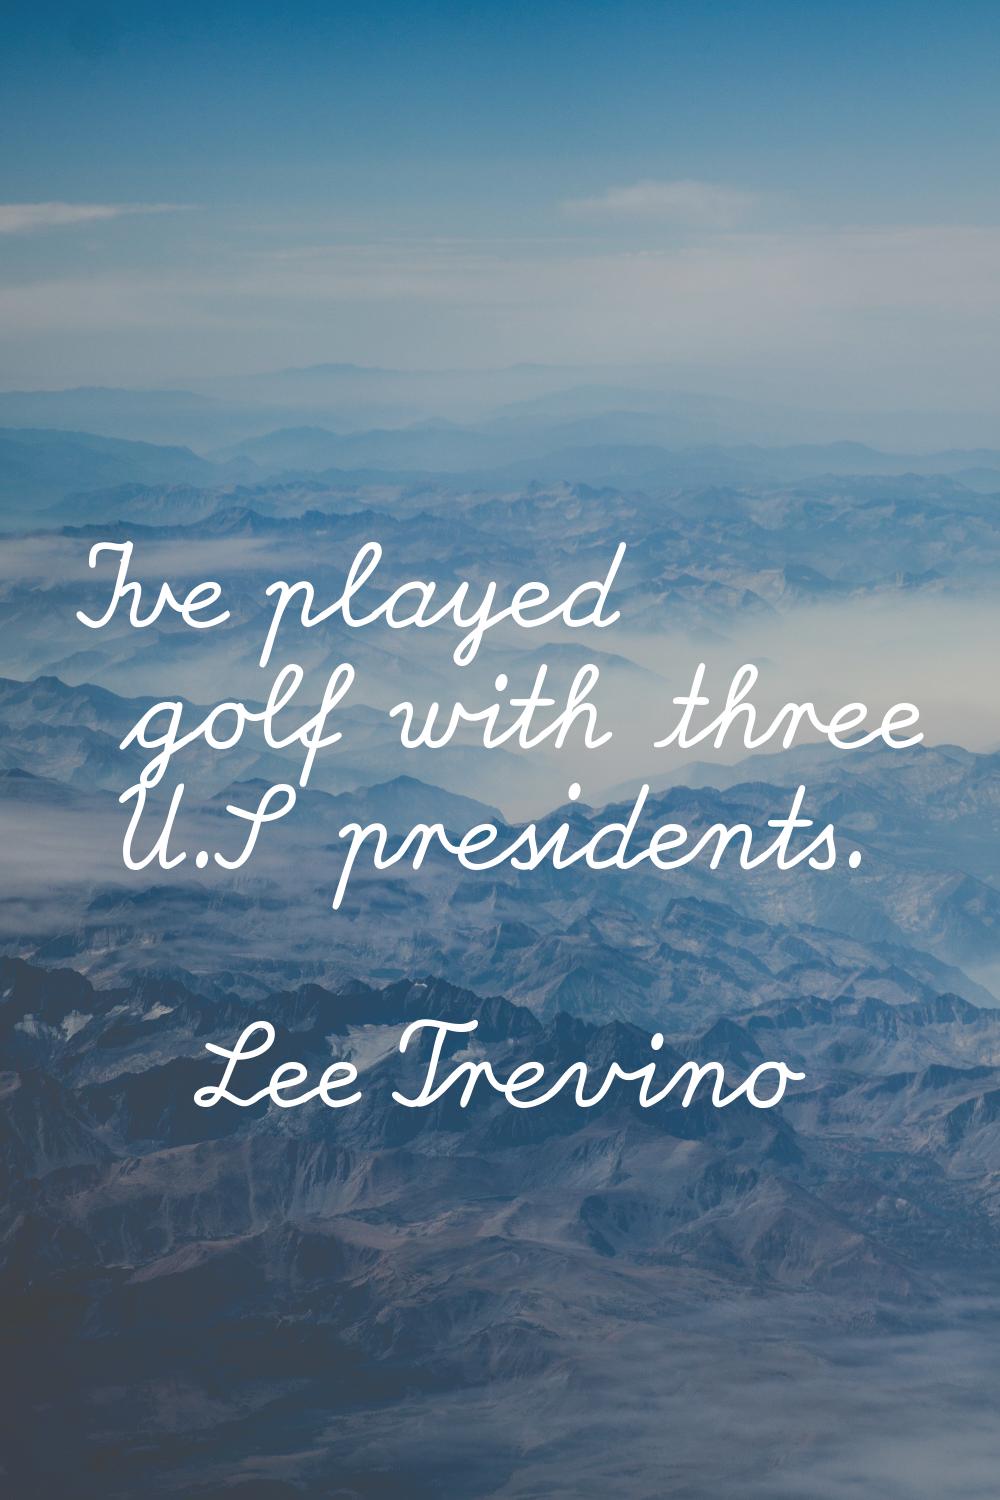 I've played golf with three U.S presidents.